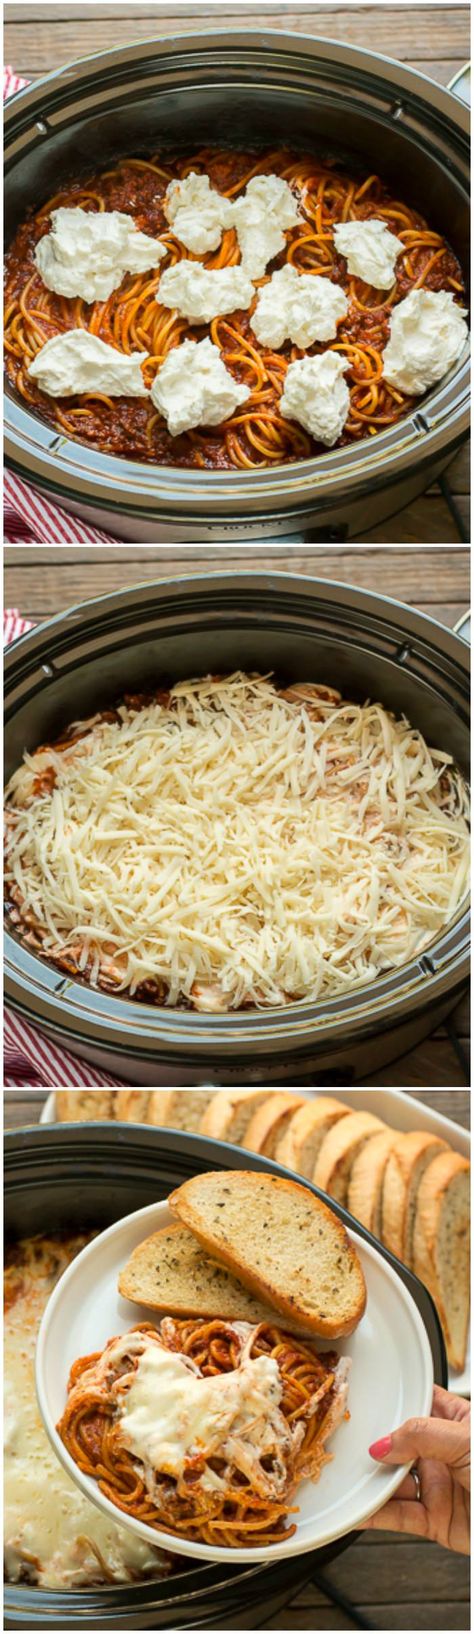 Slow Cooker Baked Spaghetti. This deluxe spaghetti is such a treat! It has a creamy layer baked in! 